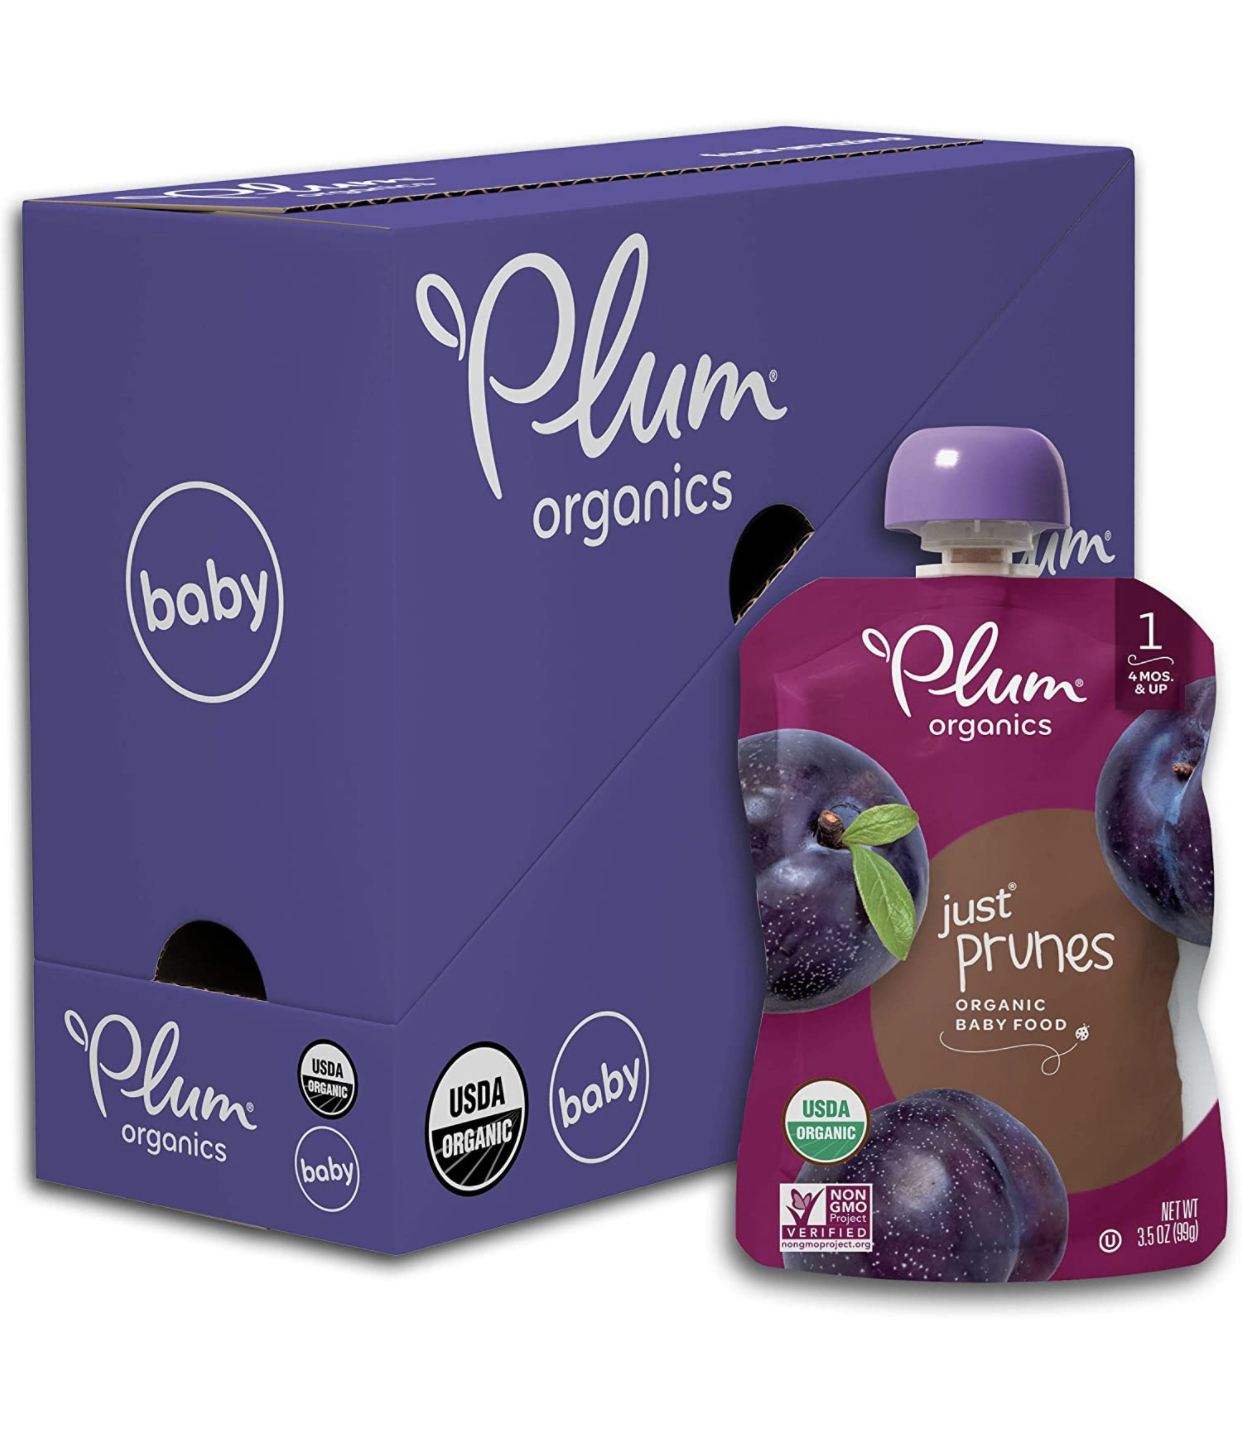 Photo 1 of 2 Sets I Plum Organics Stage 1 Organic Baby Food Prune Puree 35 Ounce Pouch I Pack of 6 I Total of 12 Packs I Best By 09272021